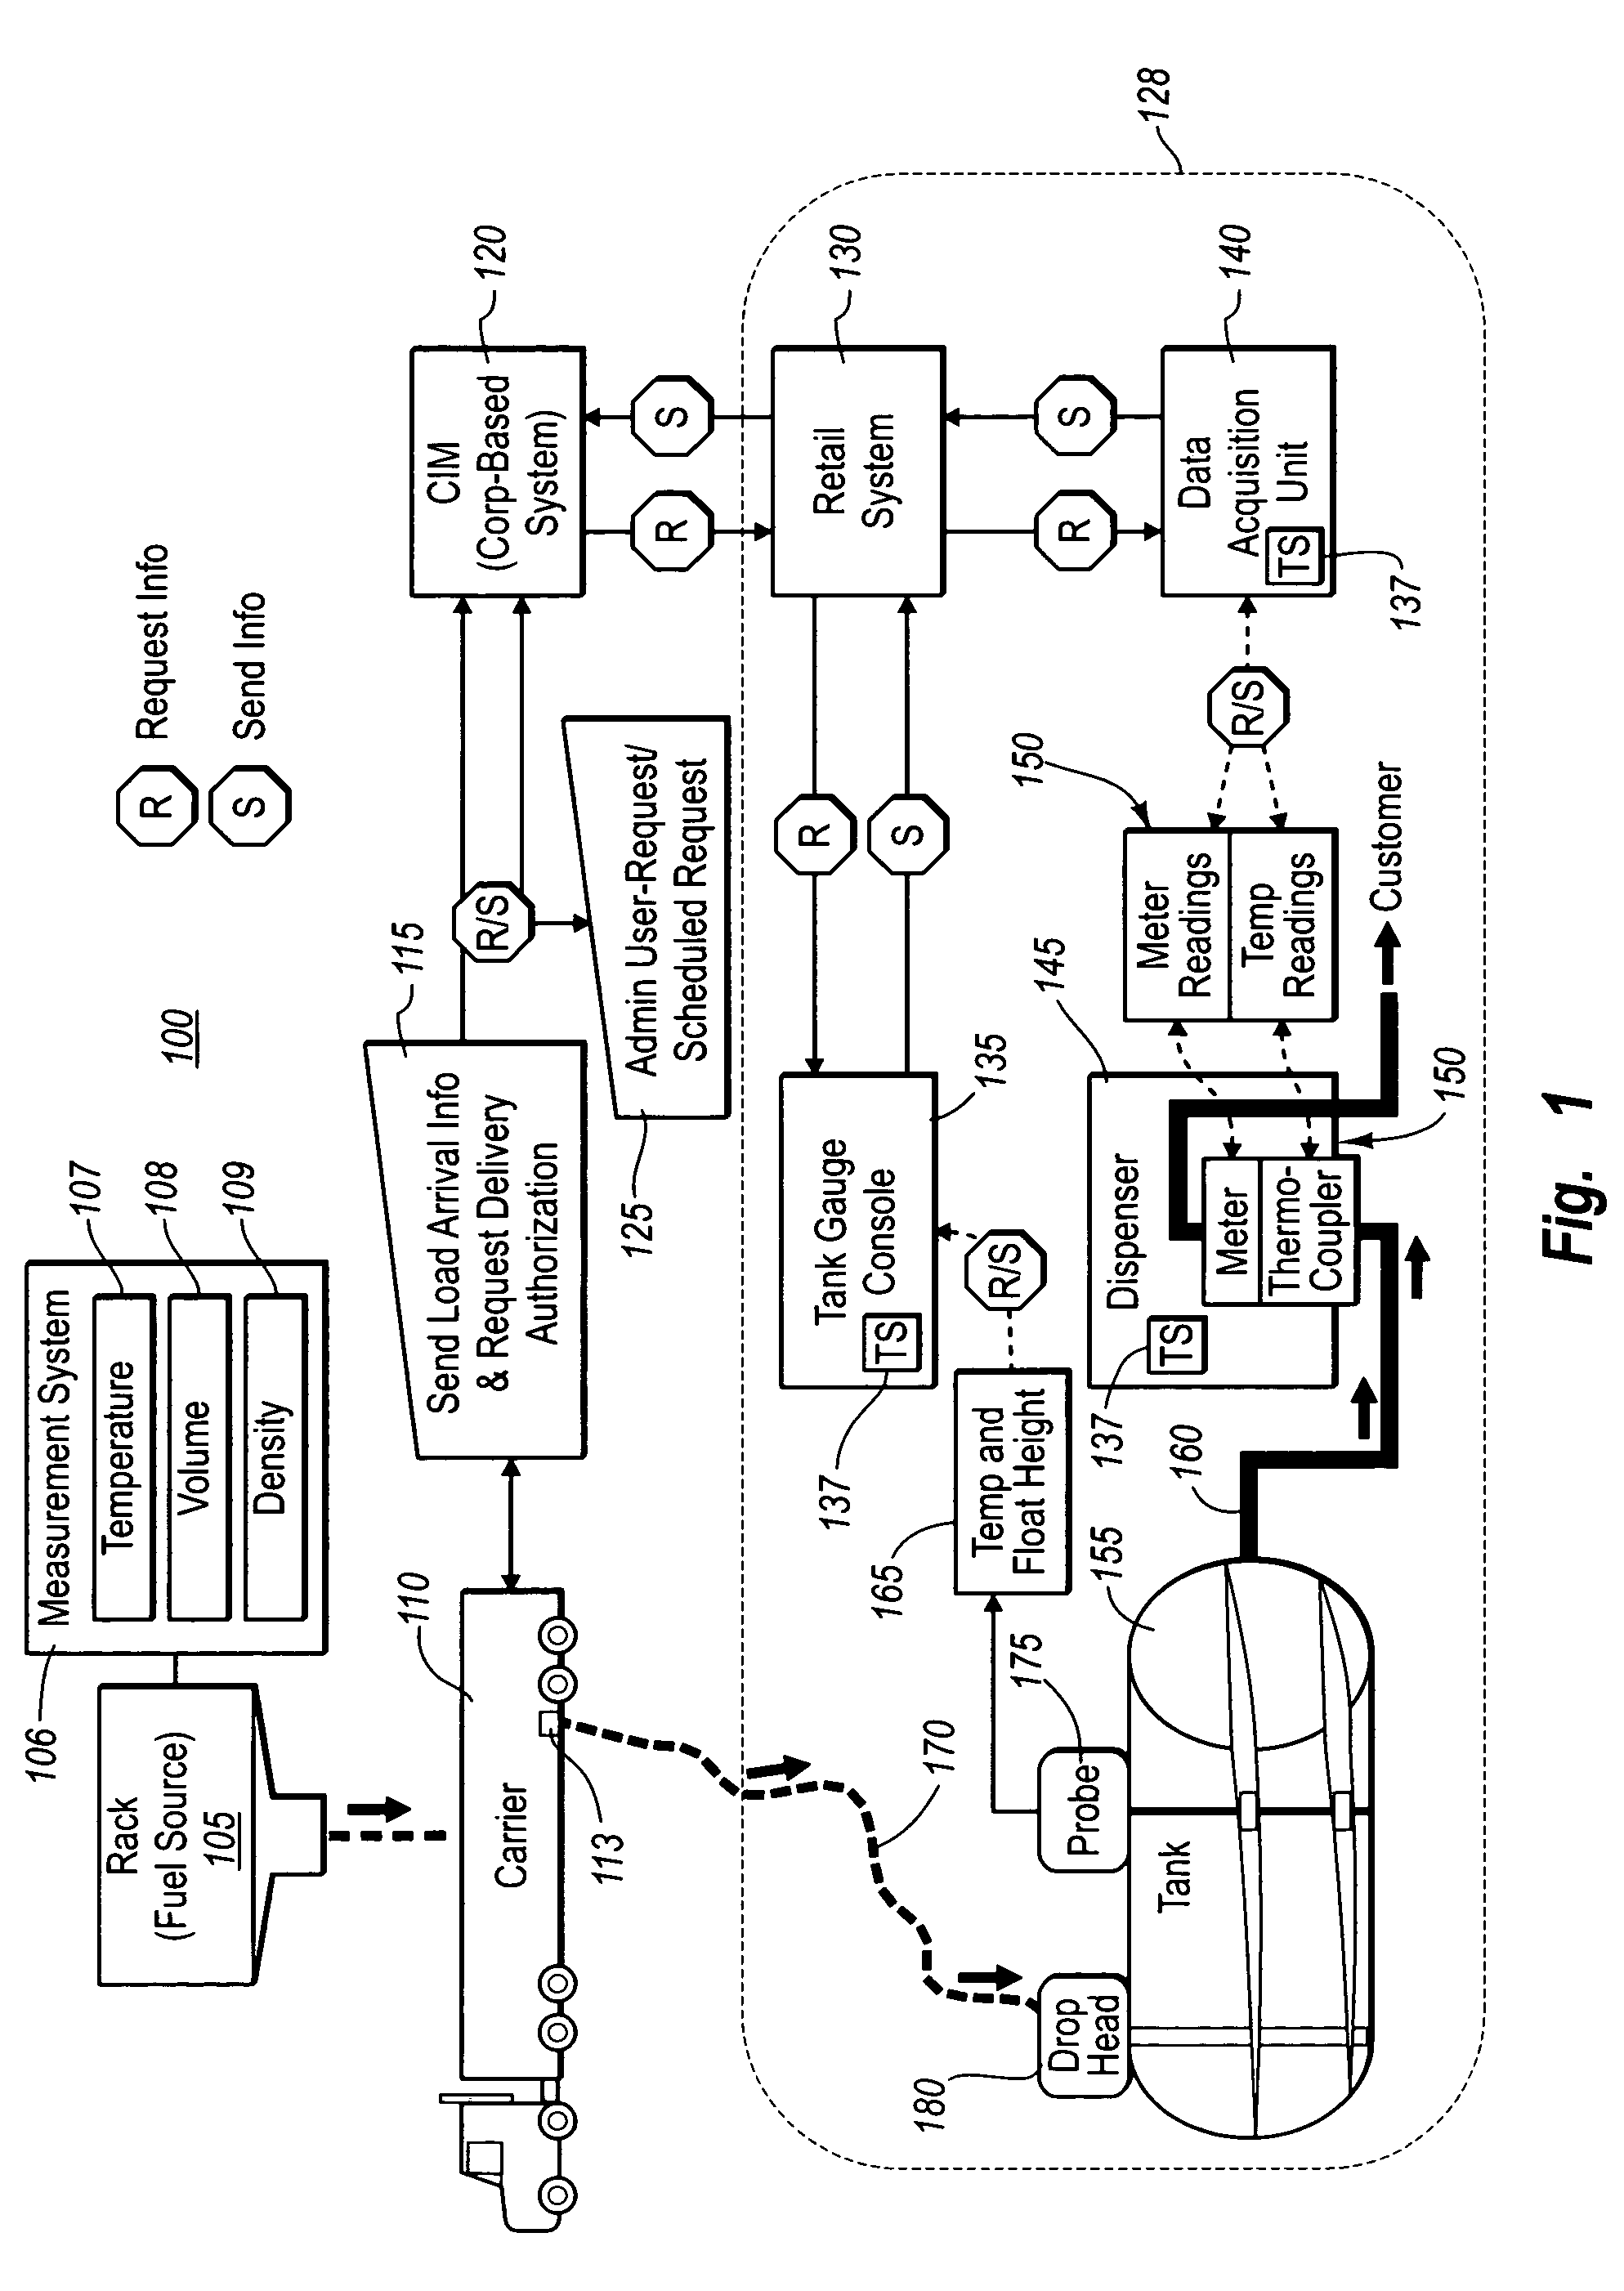 Collecting liquid product volume data at a dispenser